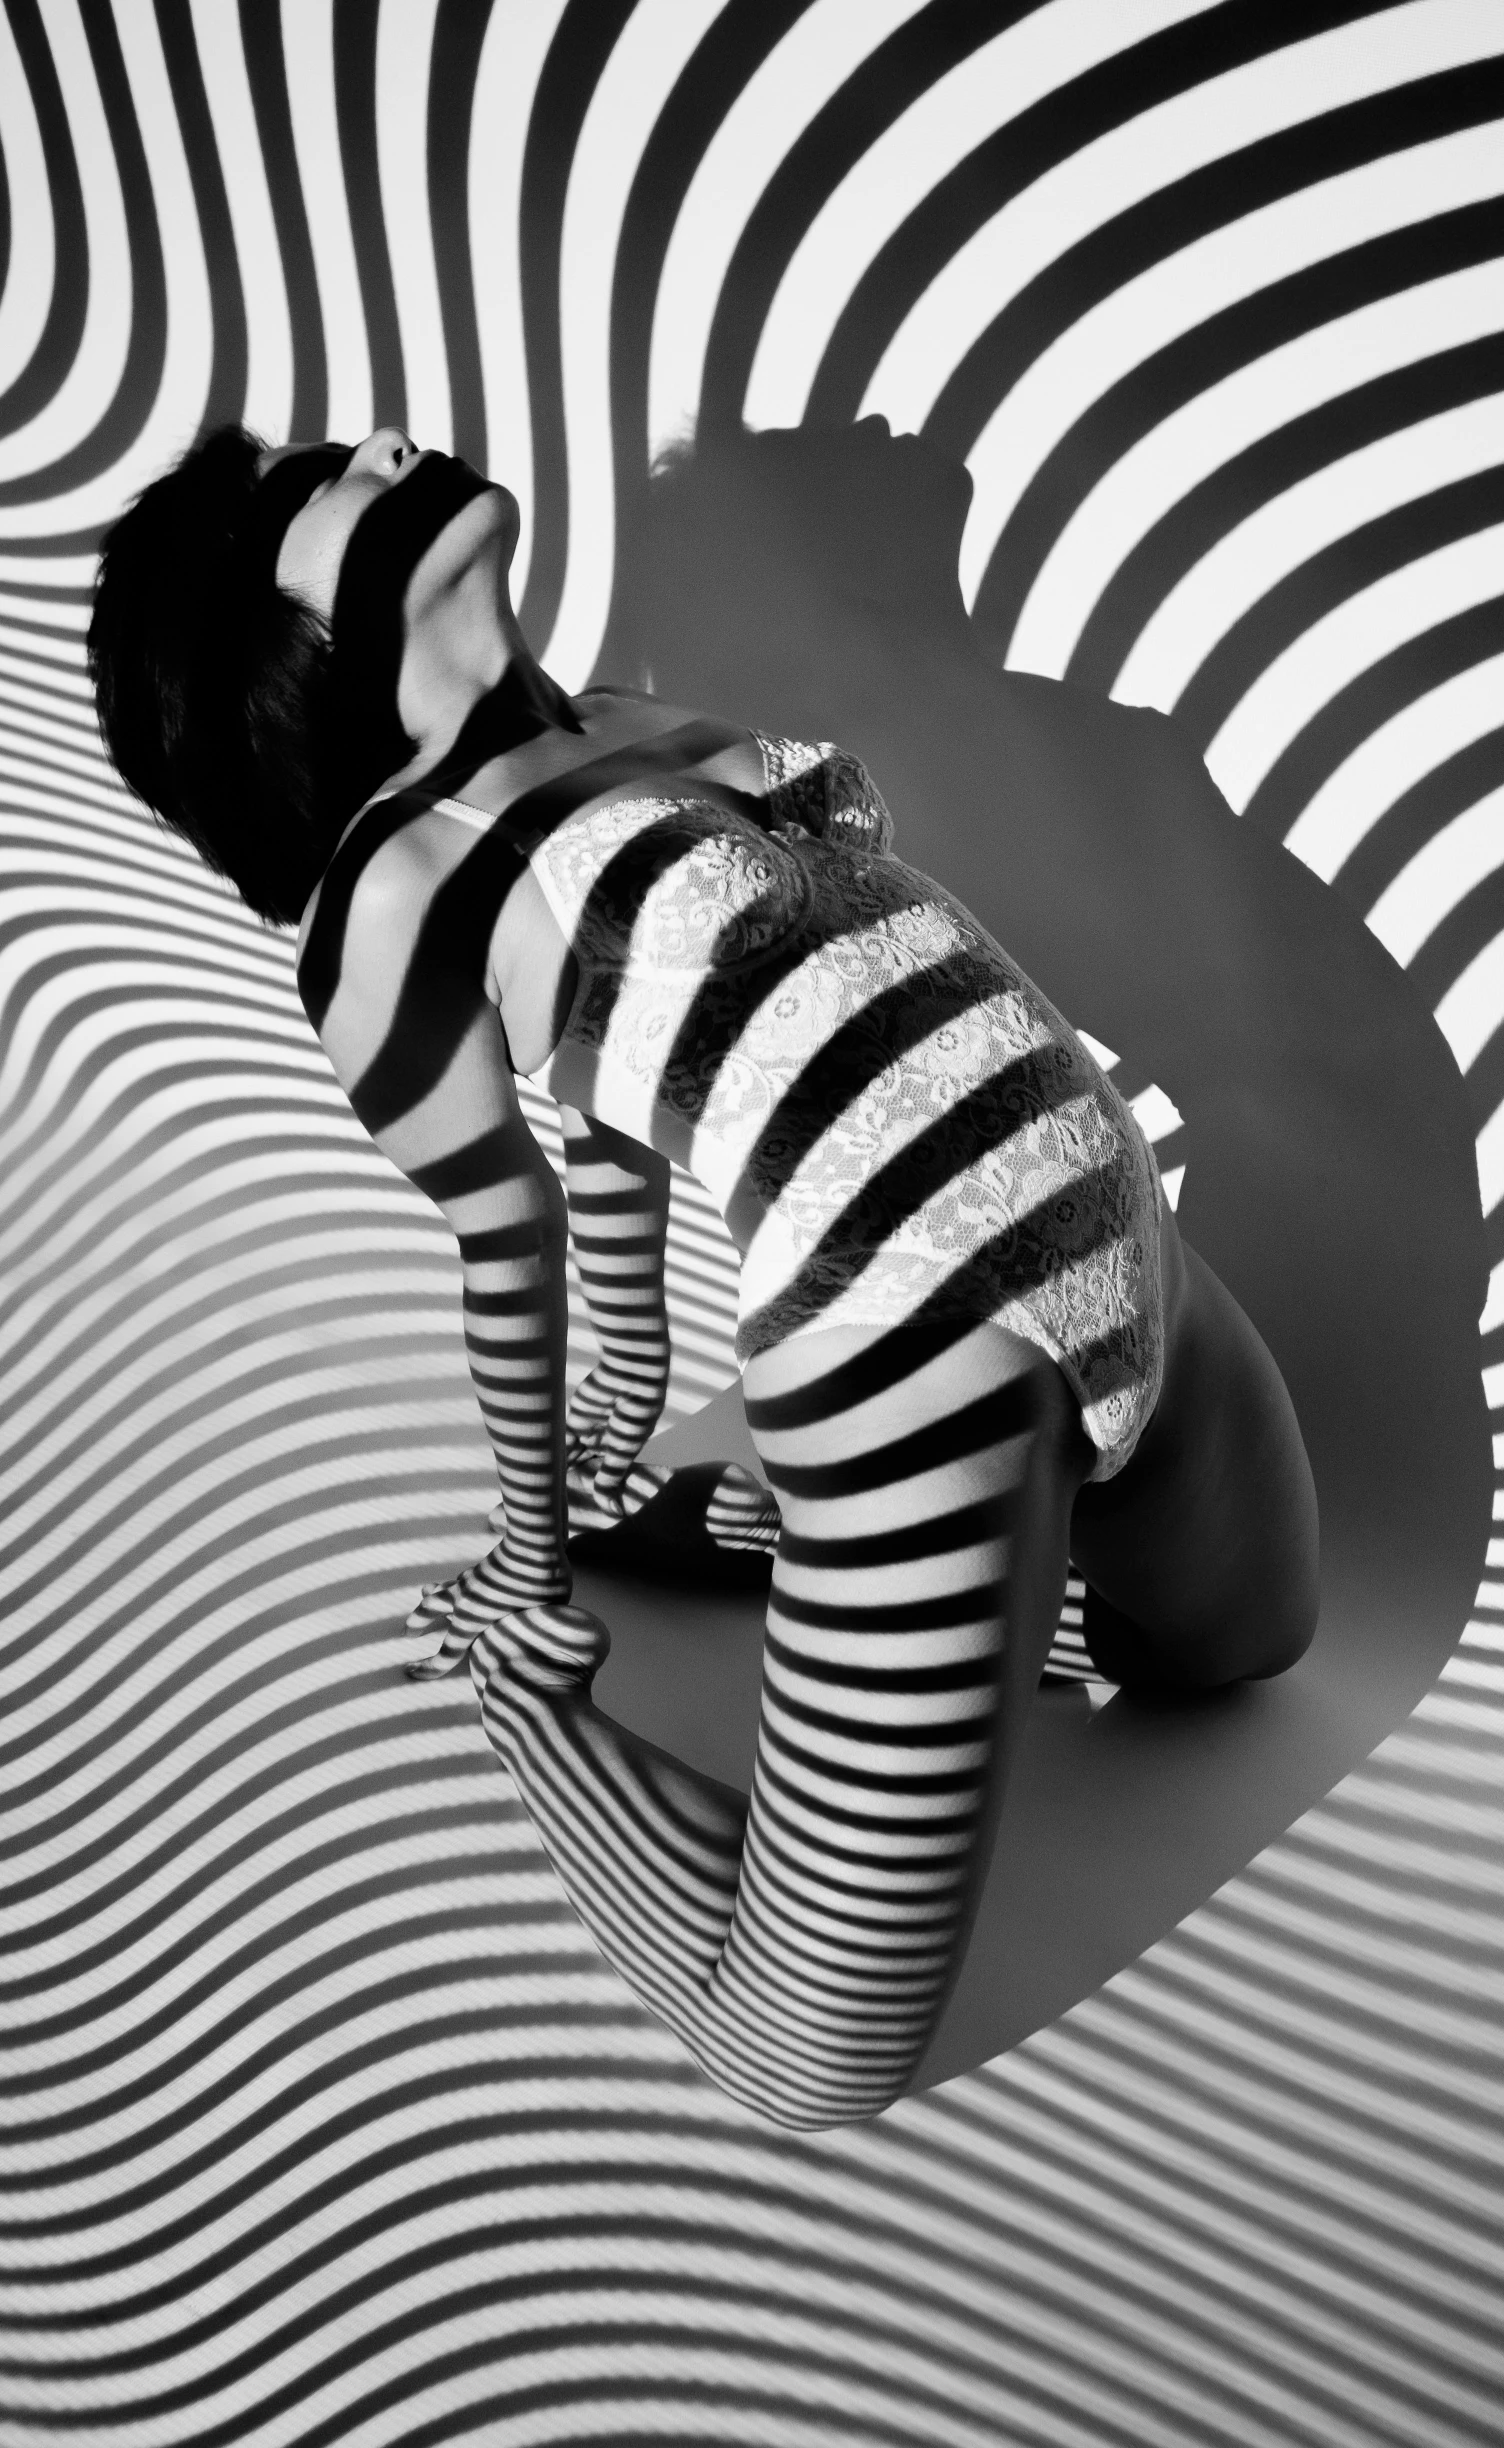 woman wearing stockings and striped tights standing in a room with distorted stripes